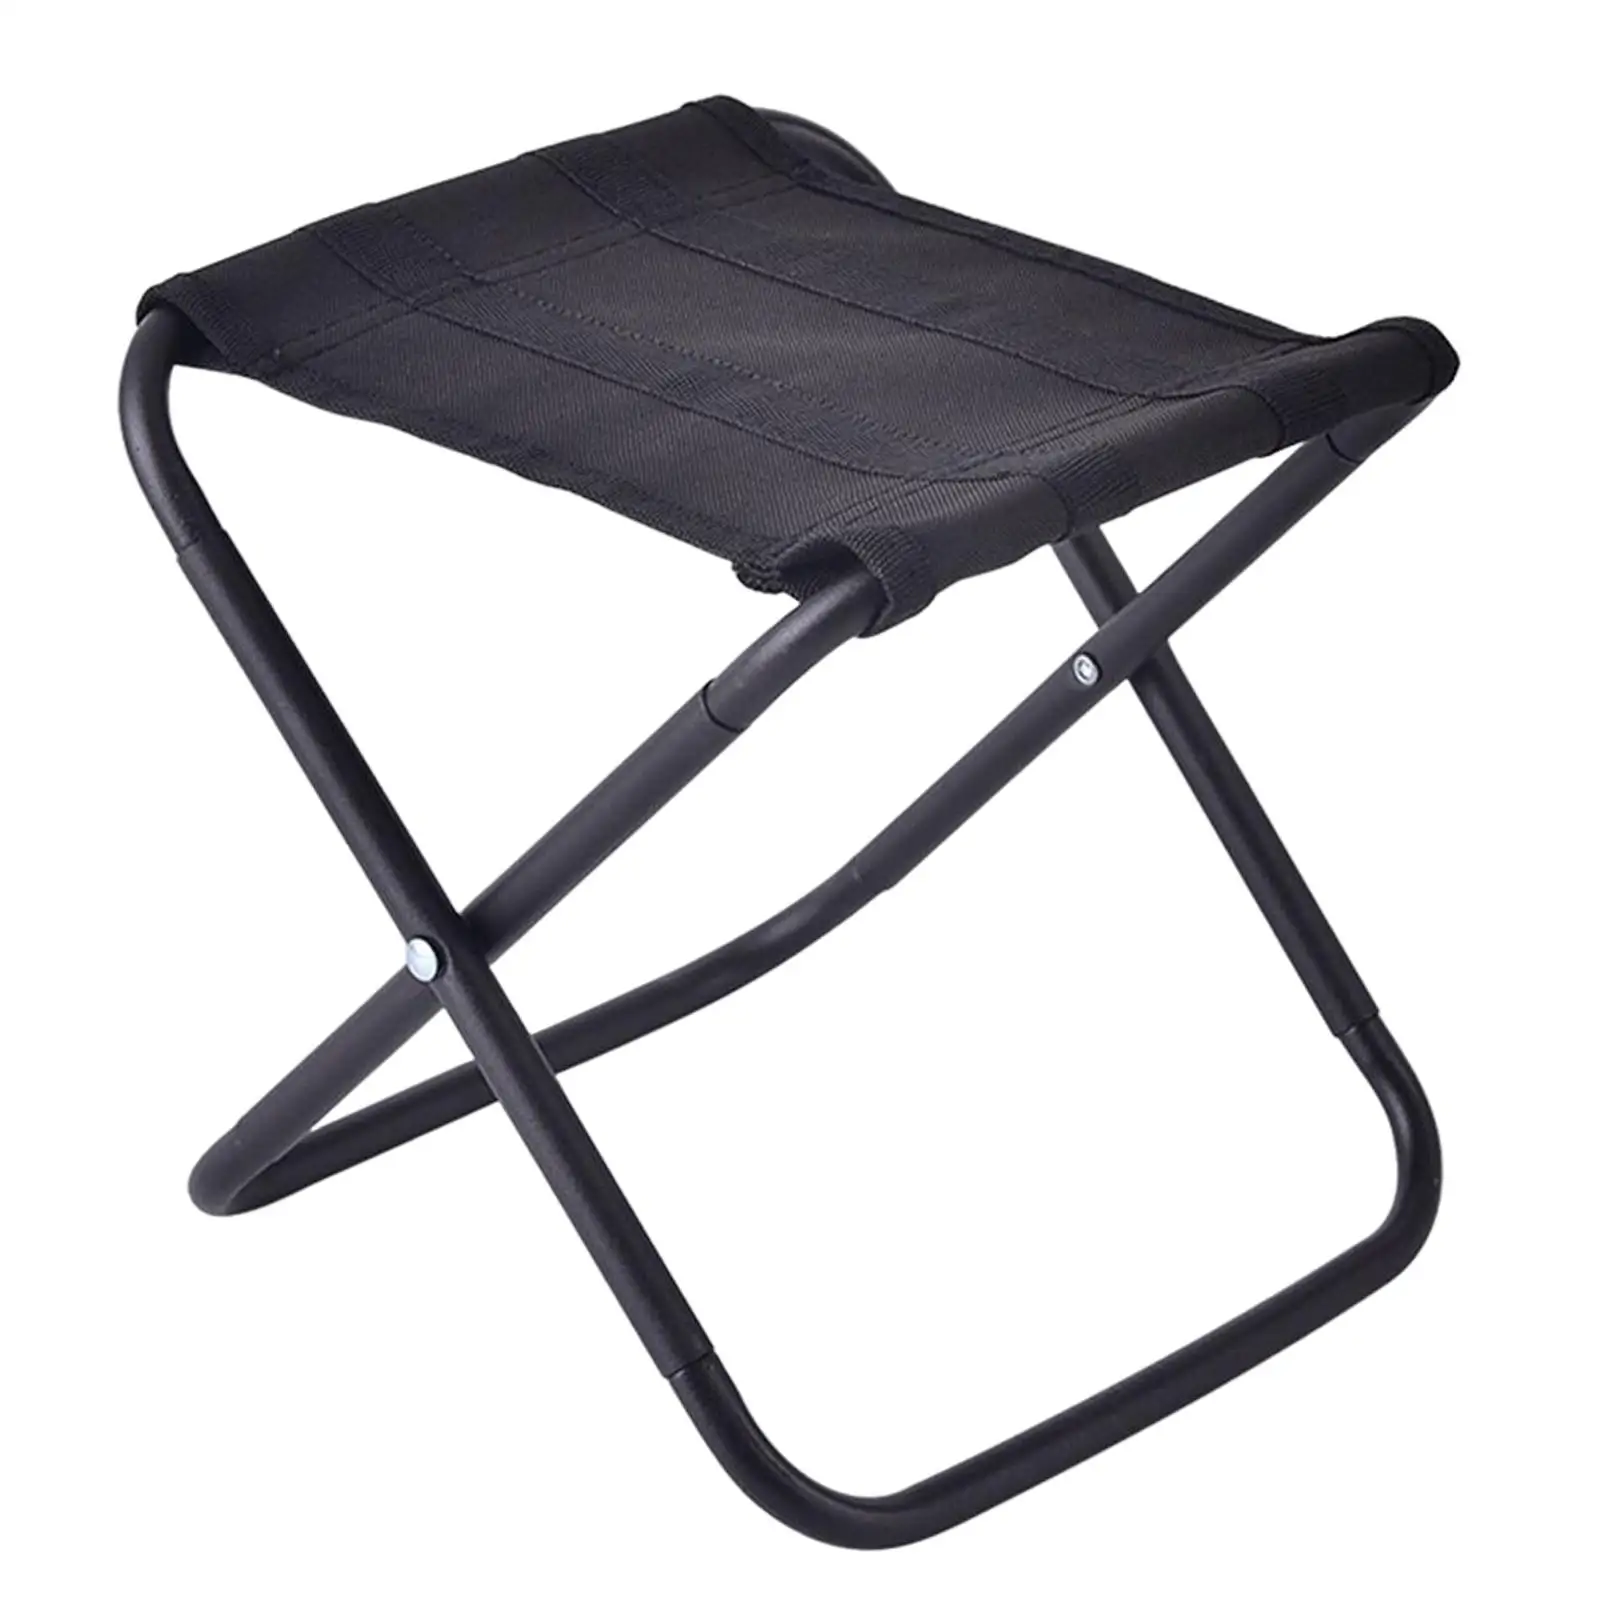 Folding Stools Lightweight Aluminum Alloy Seat for Backpacking Fishing Patio